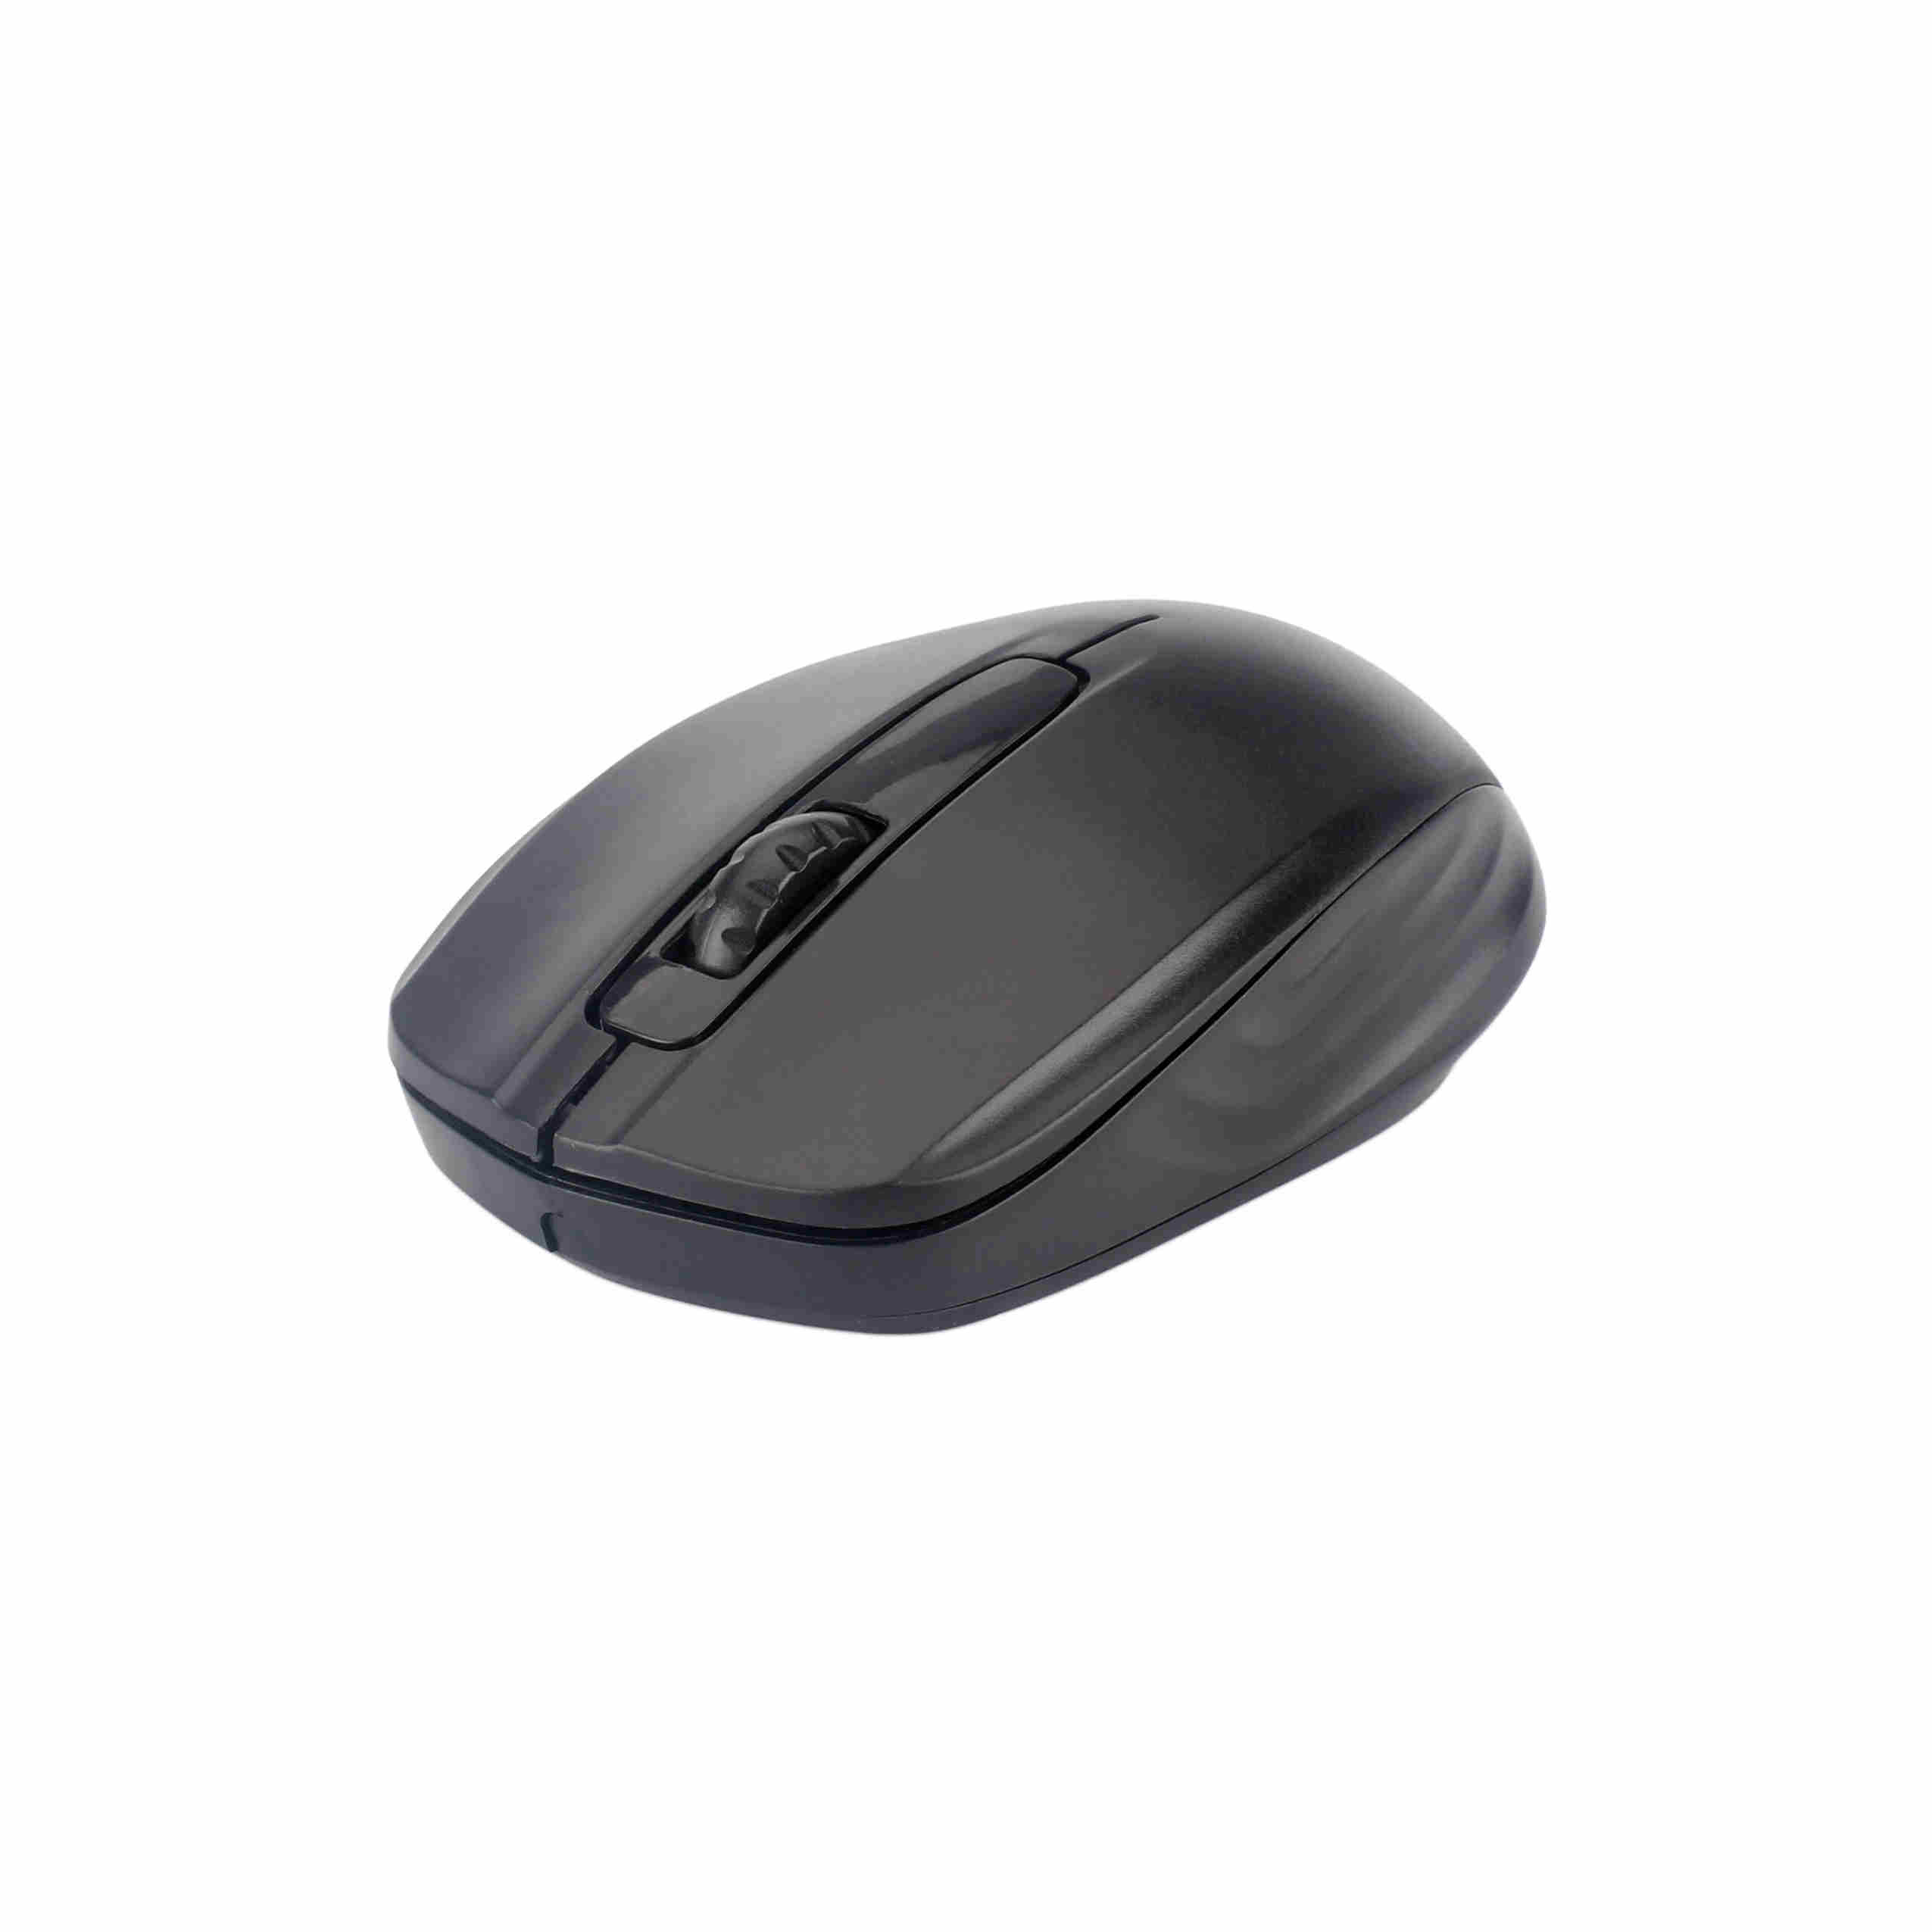 Mini Wireless Mouse,3 Buttons,Simple Office Style